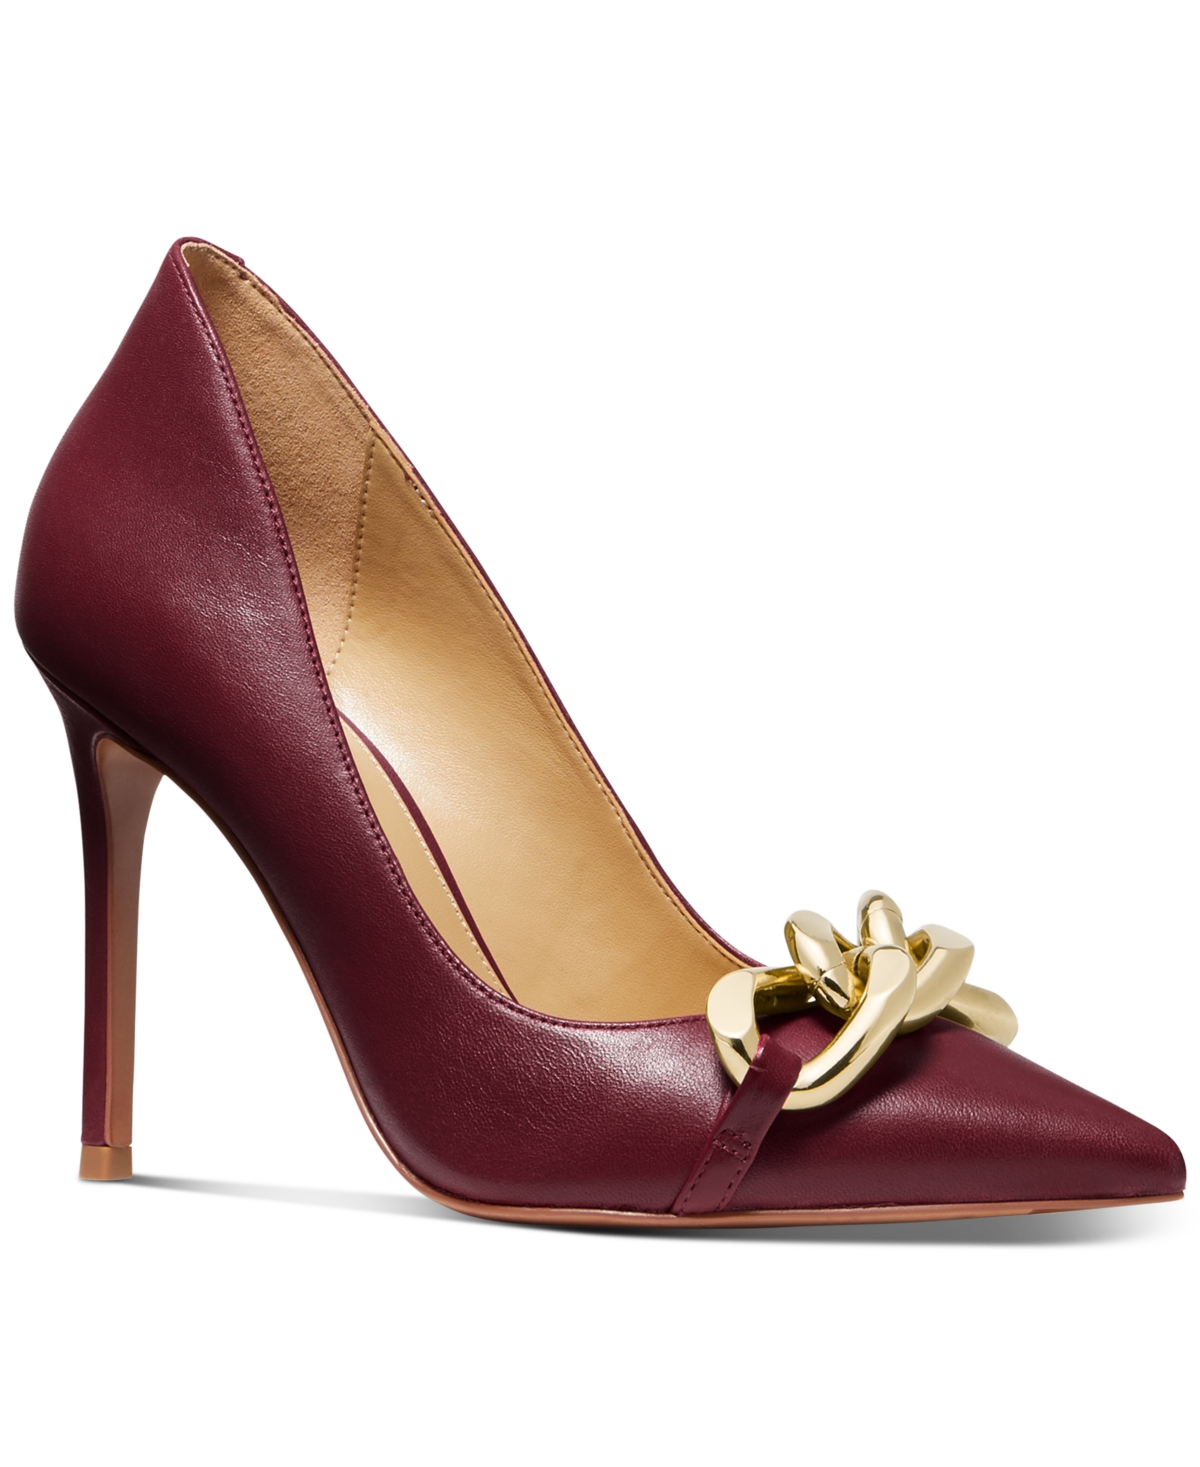 UPC 195512620942 product image for Michael Michael Kors Women's Scarlett Pointed-Toe Chain Pumps Women's Shoes | upcitemdb.com